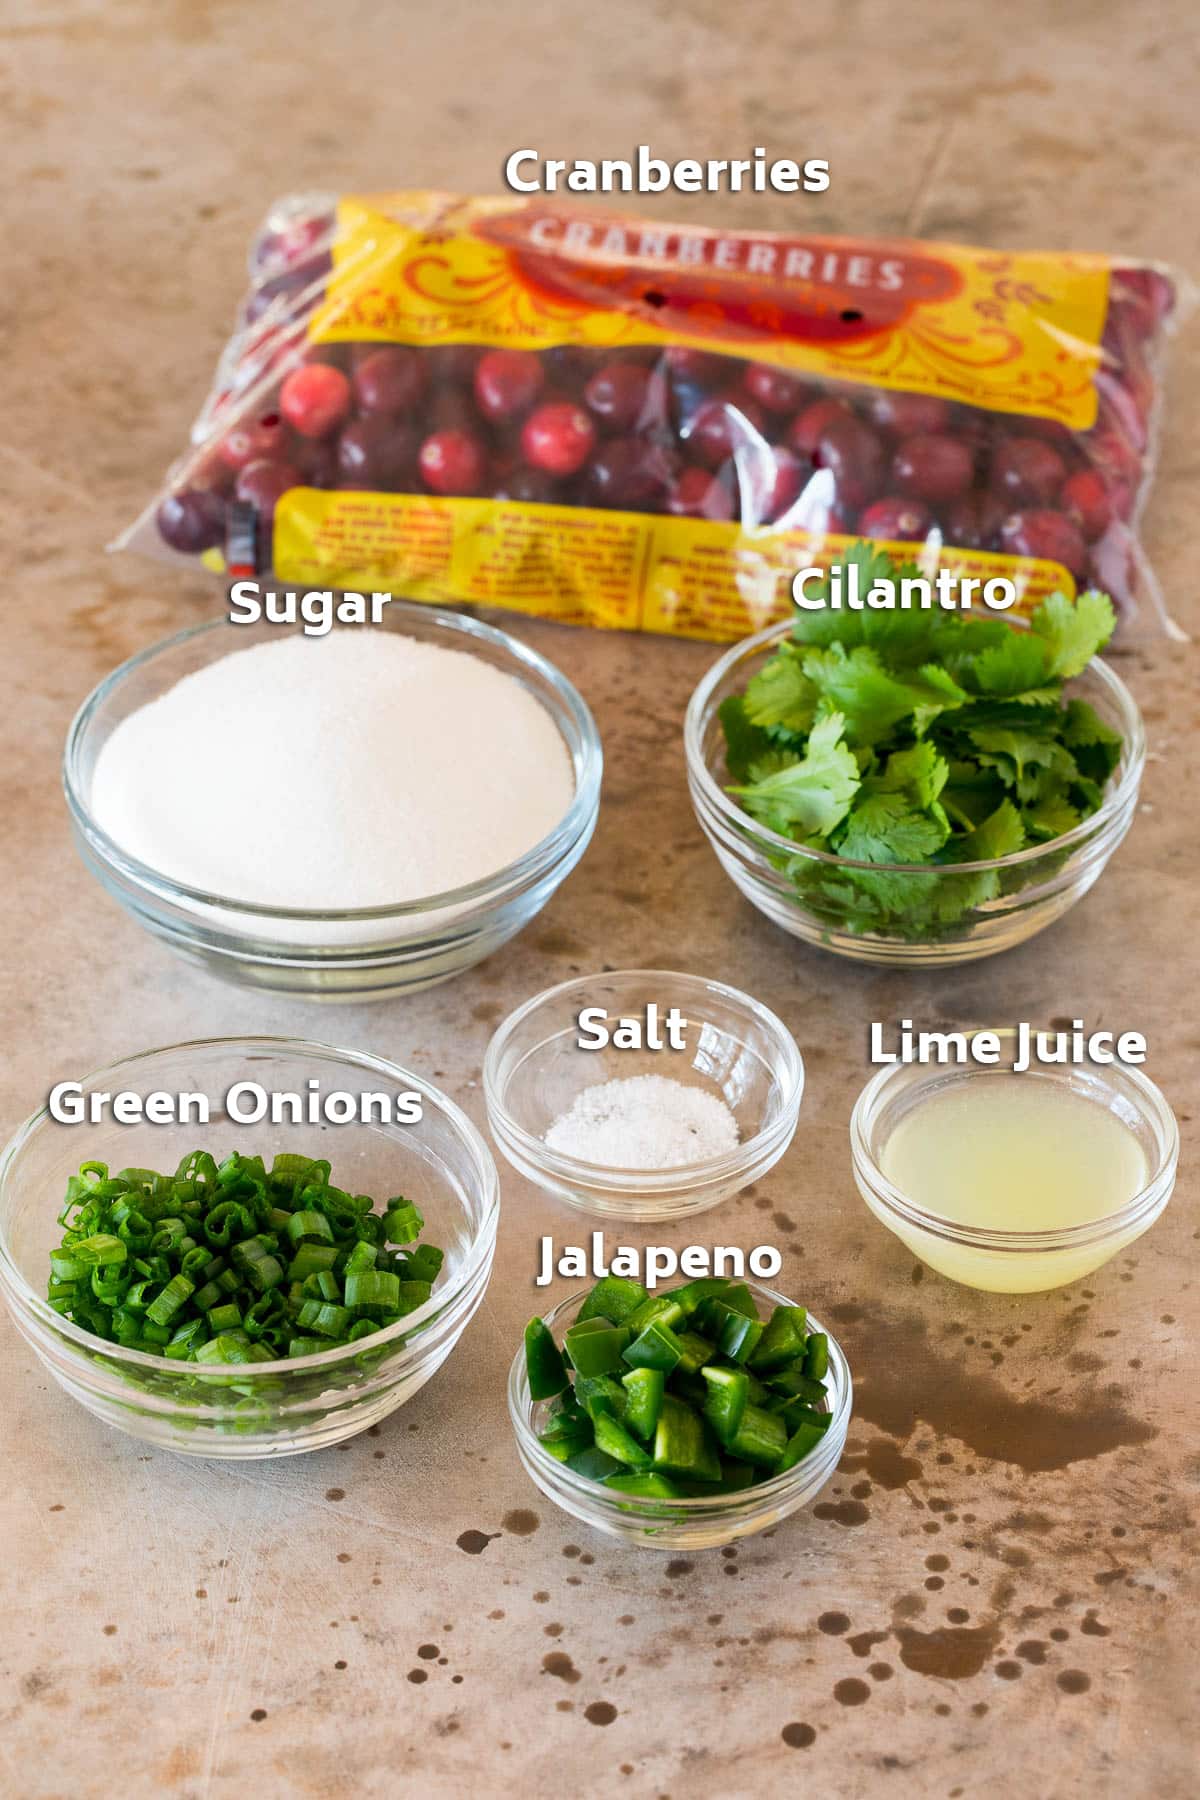 Ingredients including berries, lime juice, cilantro, green onions and sugar.